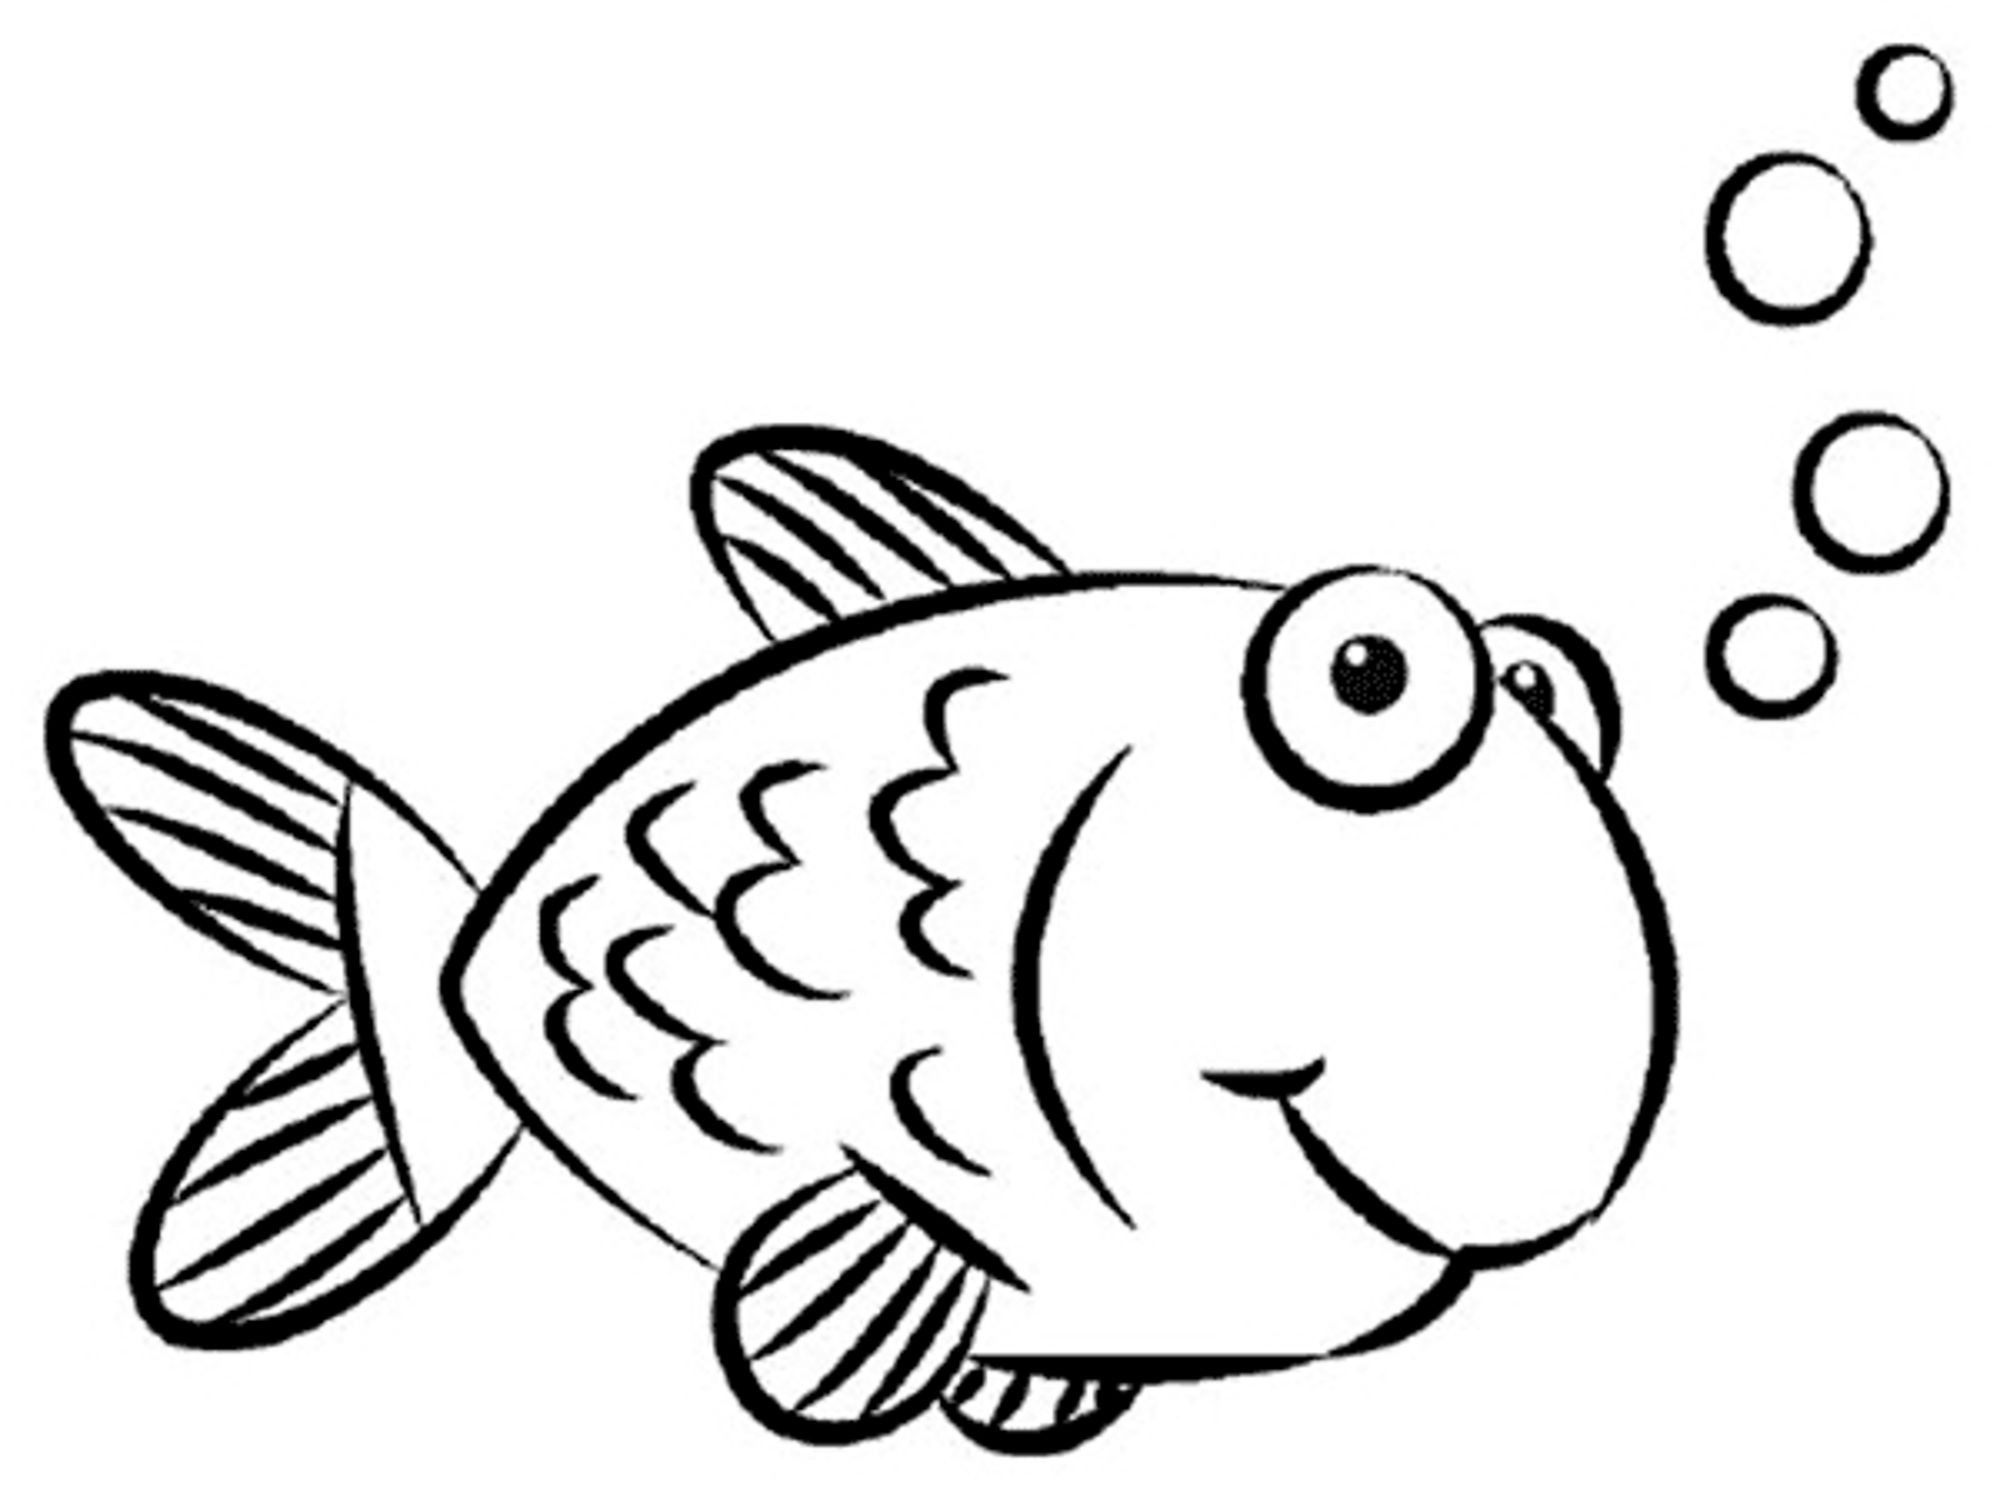 Fish Coloring Pages For Kids
 Print & Download Cute and Educative Fish Coloring Pages